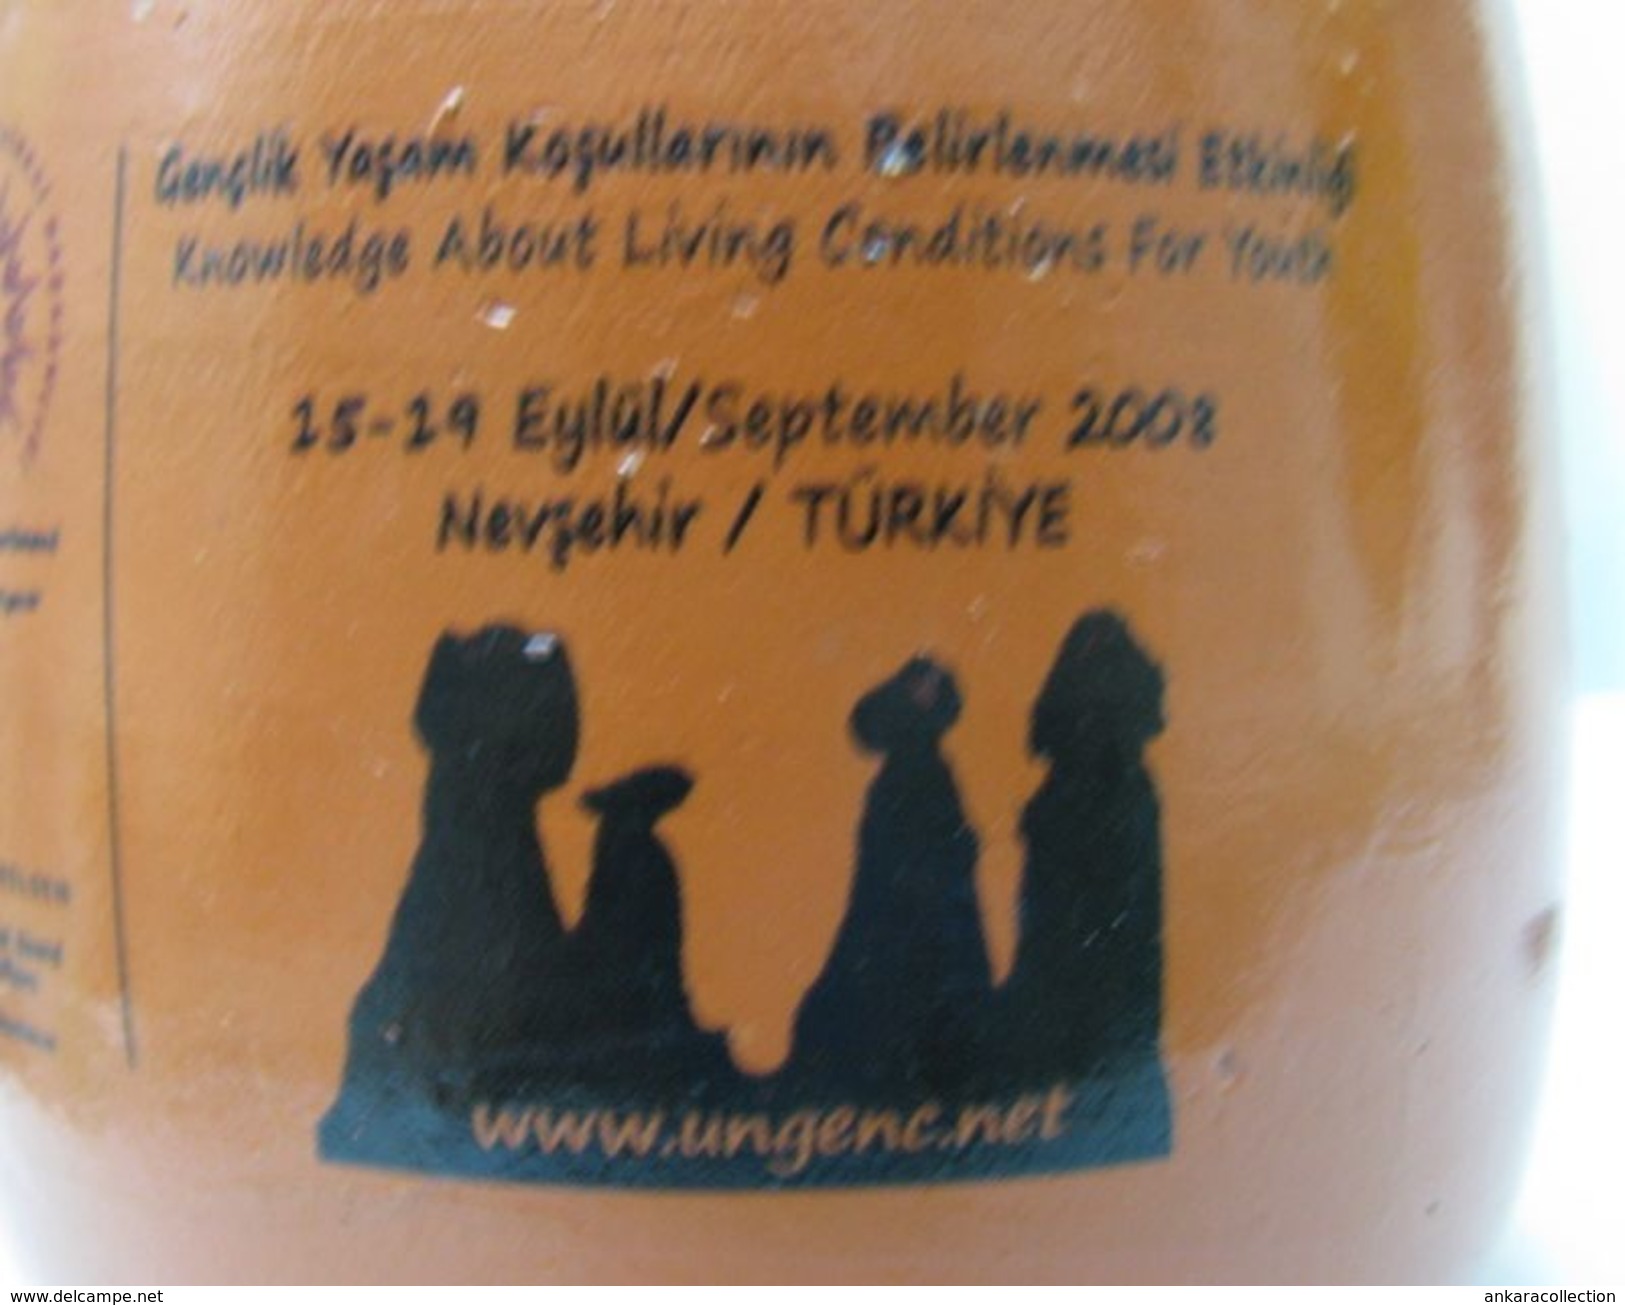 AC-  KNOWLEDGE ABOUT LIVING CONDITIONS FOR YOUTH 15 - 19 SEPTEMBER 2008 NEVSEHIR TURKEY SWEDISH NATIONAL BOARD FOR YOUTH - Tazze